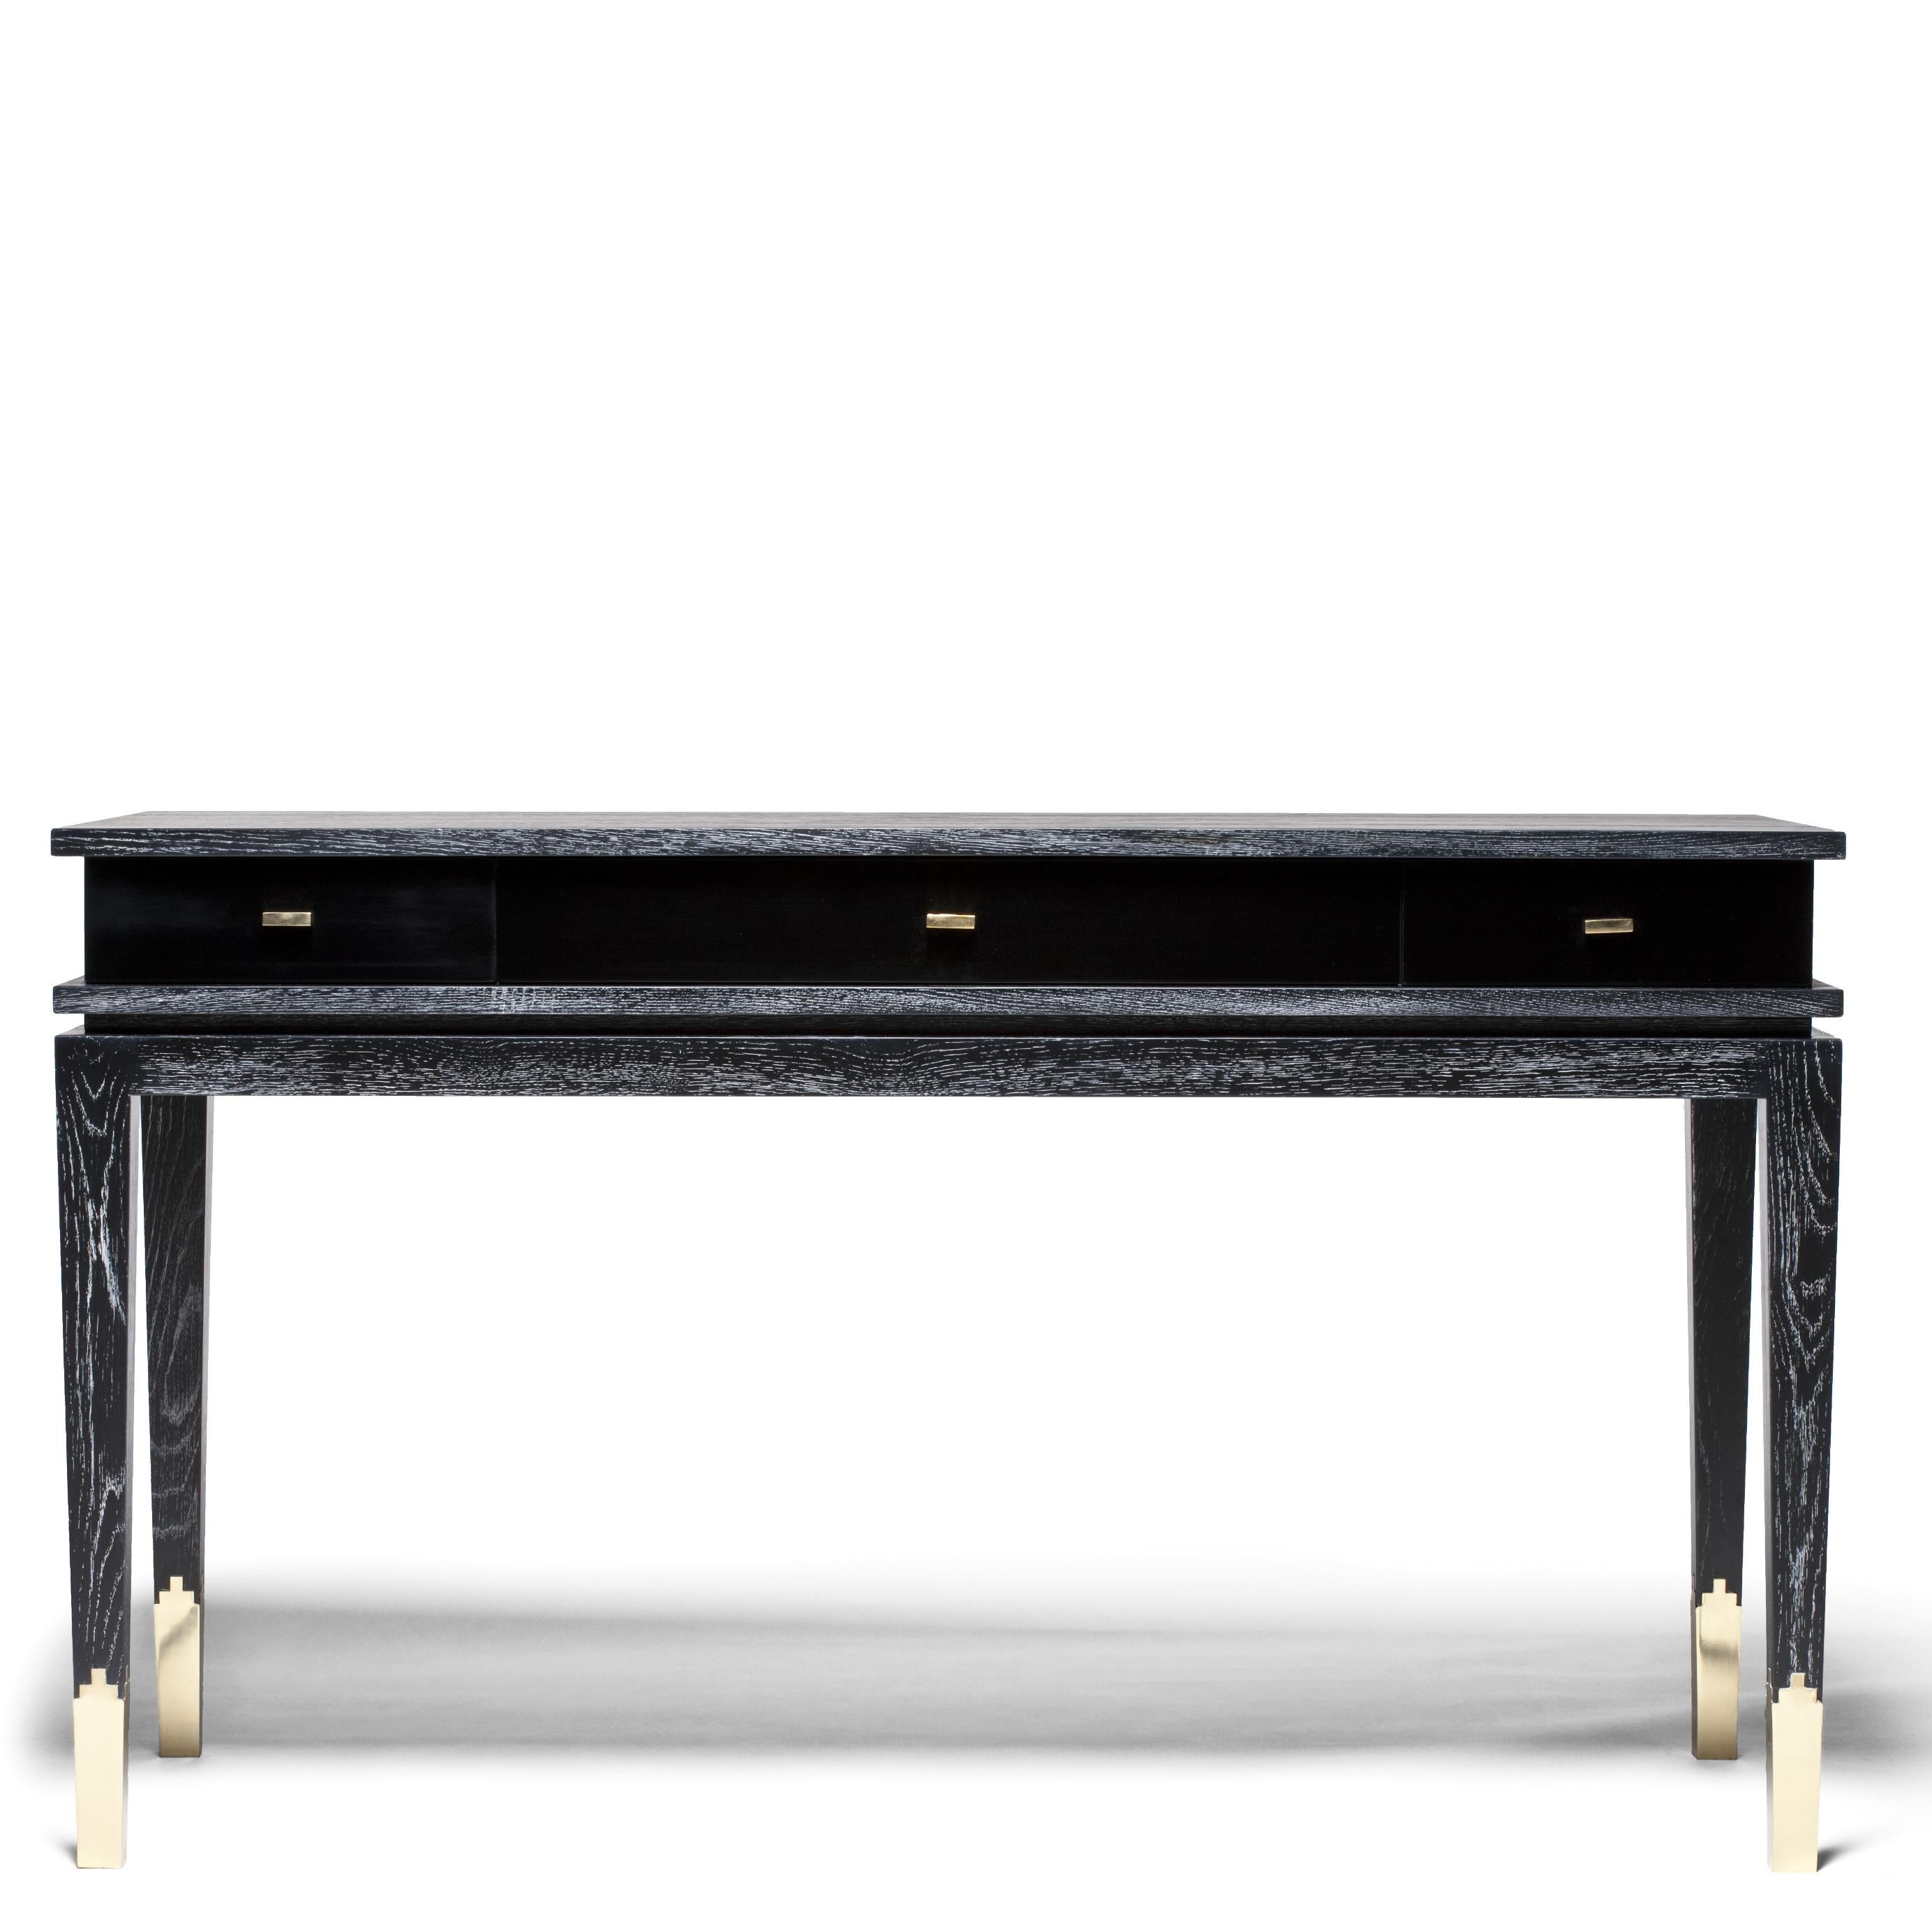 Anna Console by DUISTT 
Dimensions: W 130 x D 55 x H 77 cm
Materials: Black Limed Oak, Satin Black Lacquered Wood and Brass

Anna is an elegant console, crafted with great attention to details, that features a beautiful structure in oak with a limed